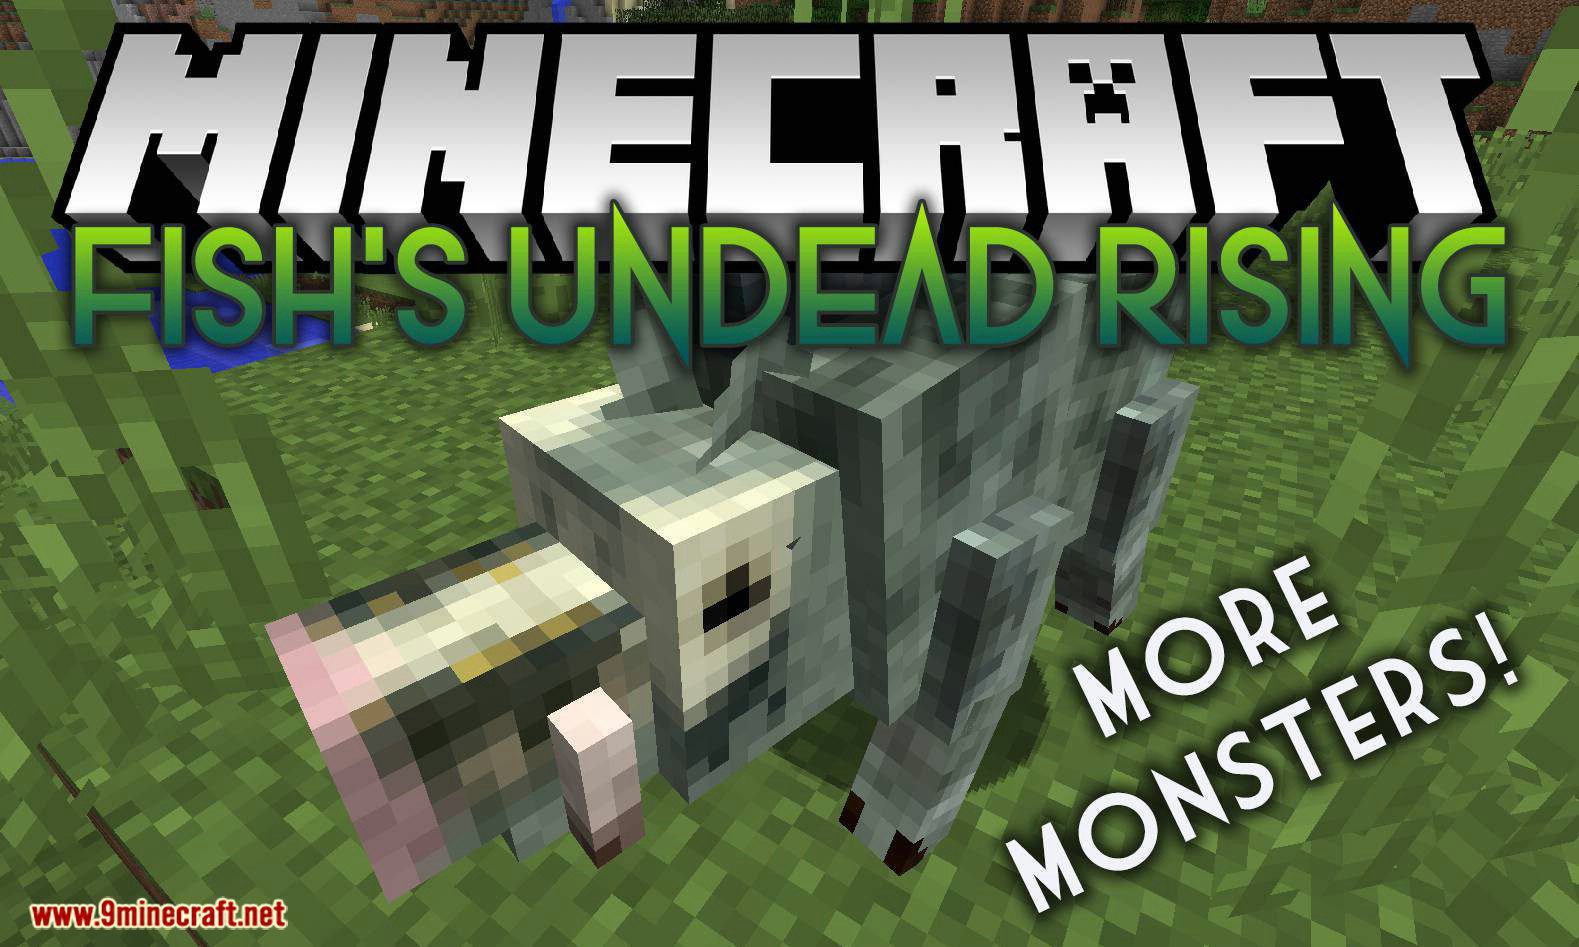 Fish's Undead Rising Mod (1.16.5, 1.12.2) - Fill Your World with All Kinds of Mobs 1